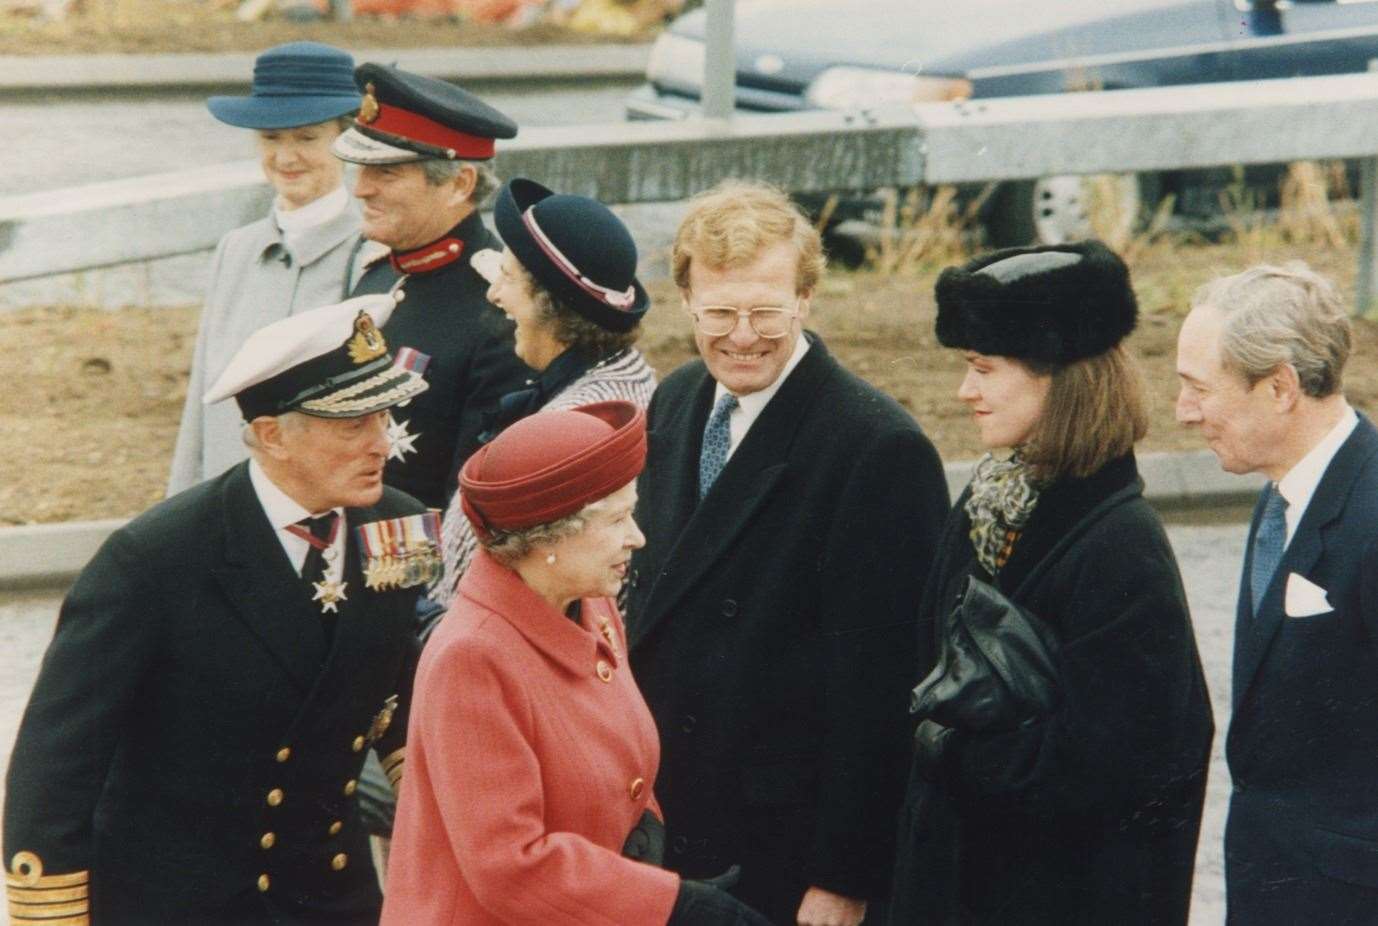 The Queen at the bridge opening in 1991